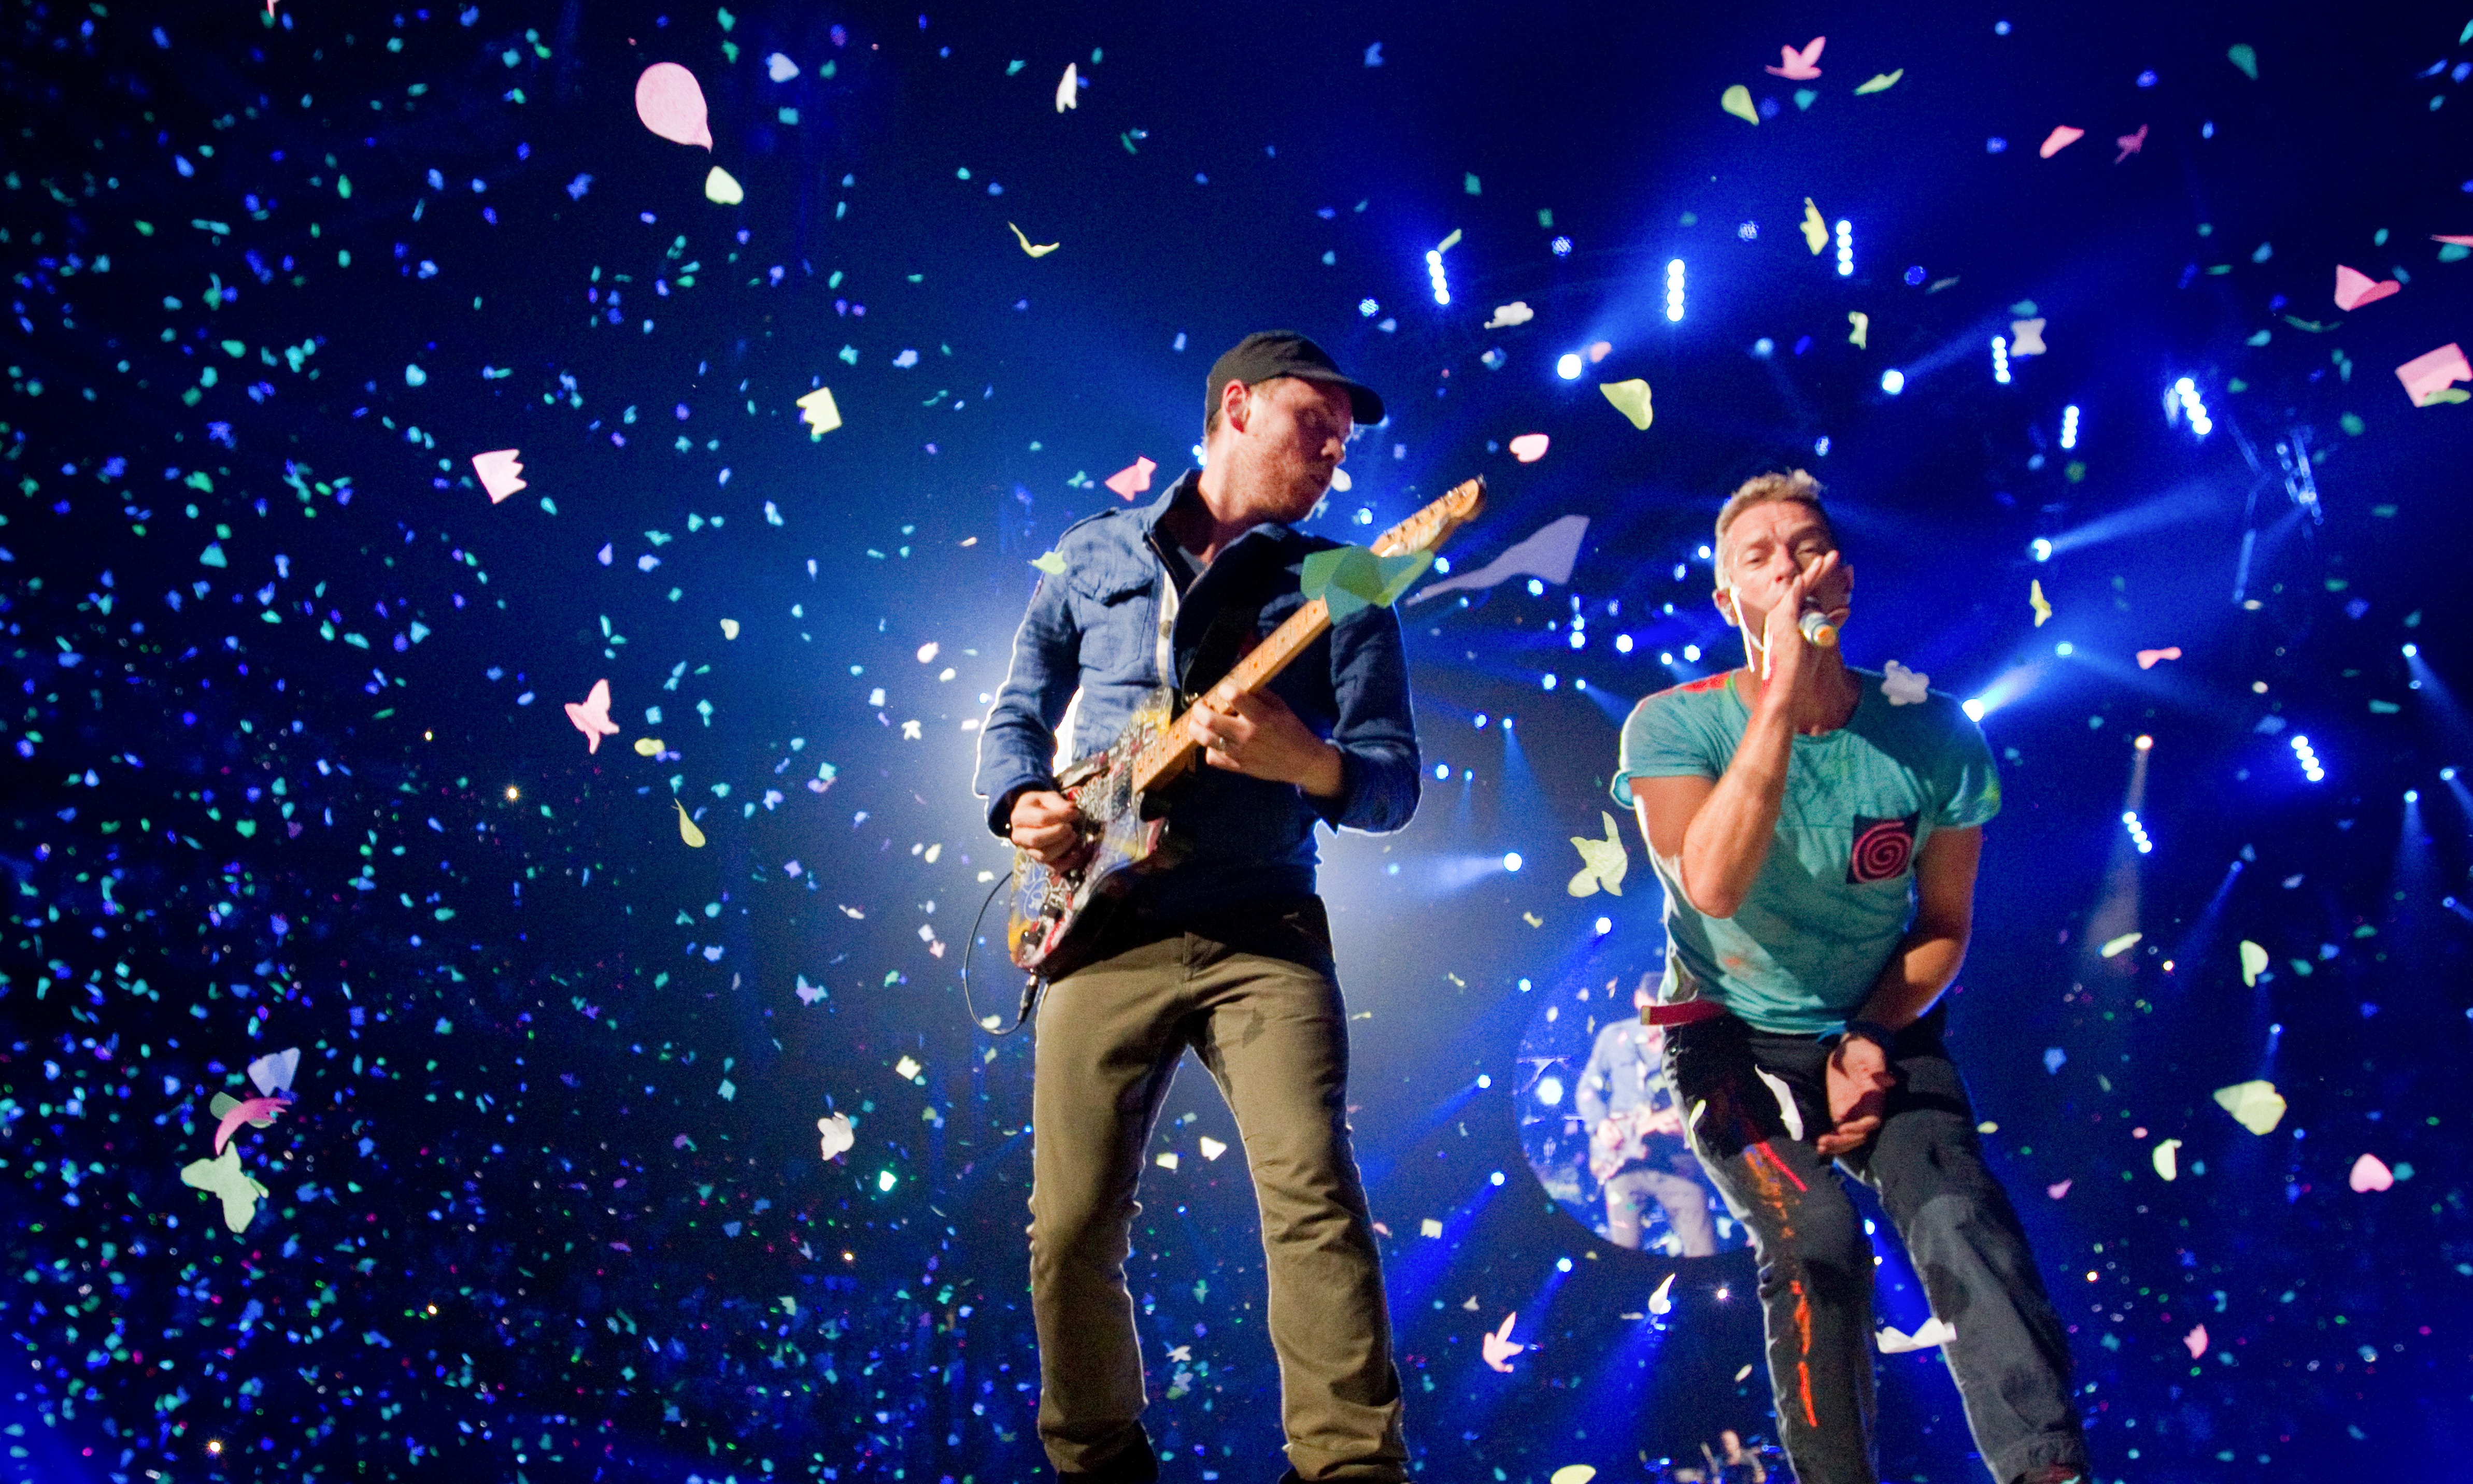 MONTREAL, QUE.: JULY 26, 2012 -- Chris Martin (right) and Jonny Buckland of the British band Coldplay in a confetti shower in concert at the Bell Centre in Montreal Thurssday, July 26, 2012. (John Kenney/THE GAZETTE)